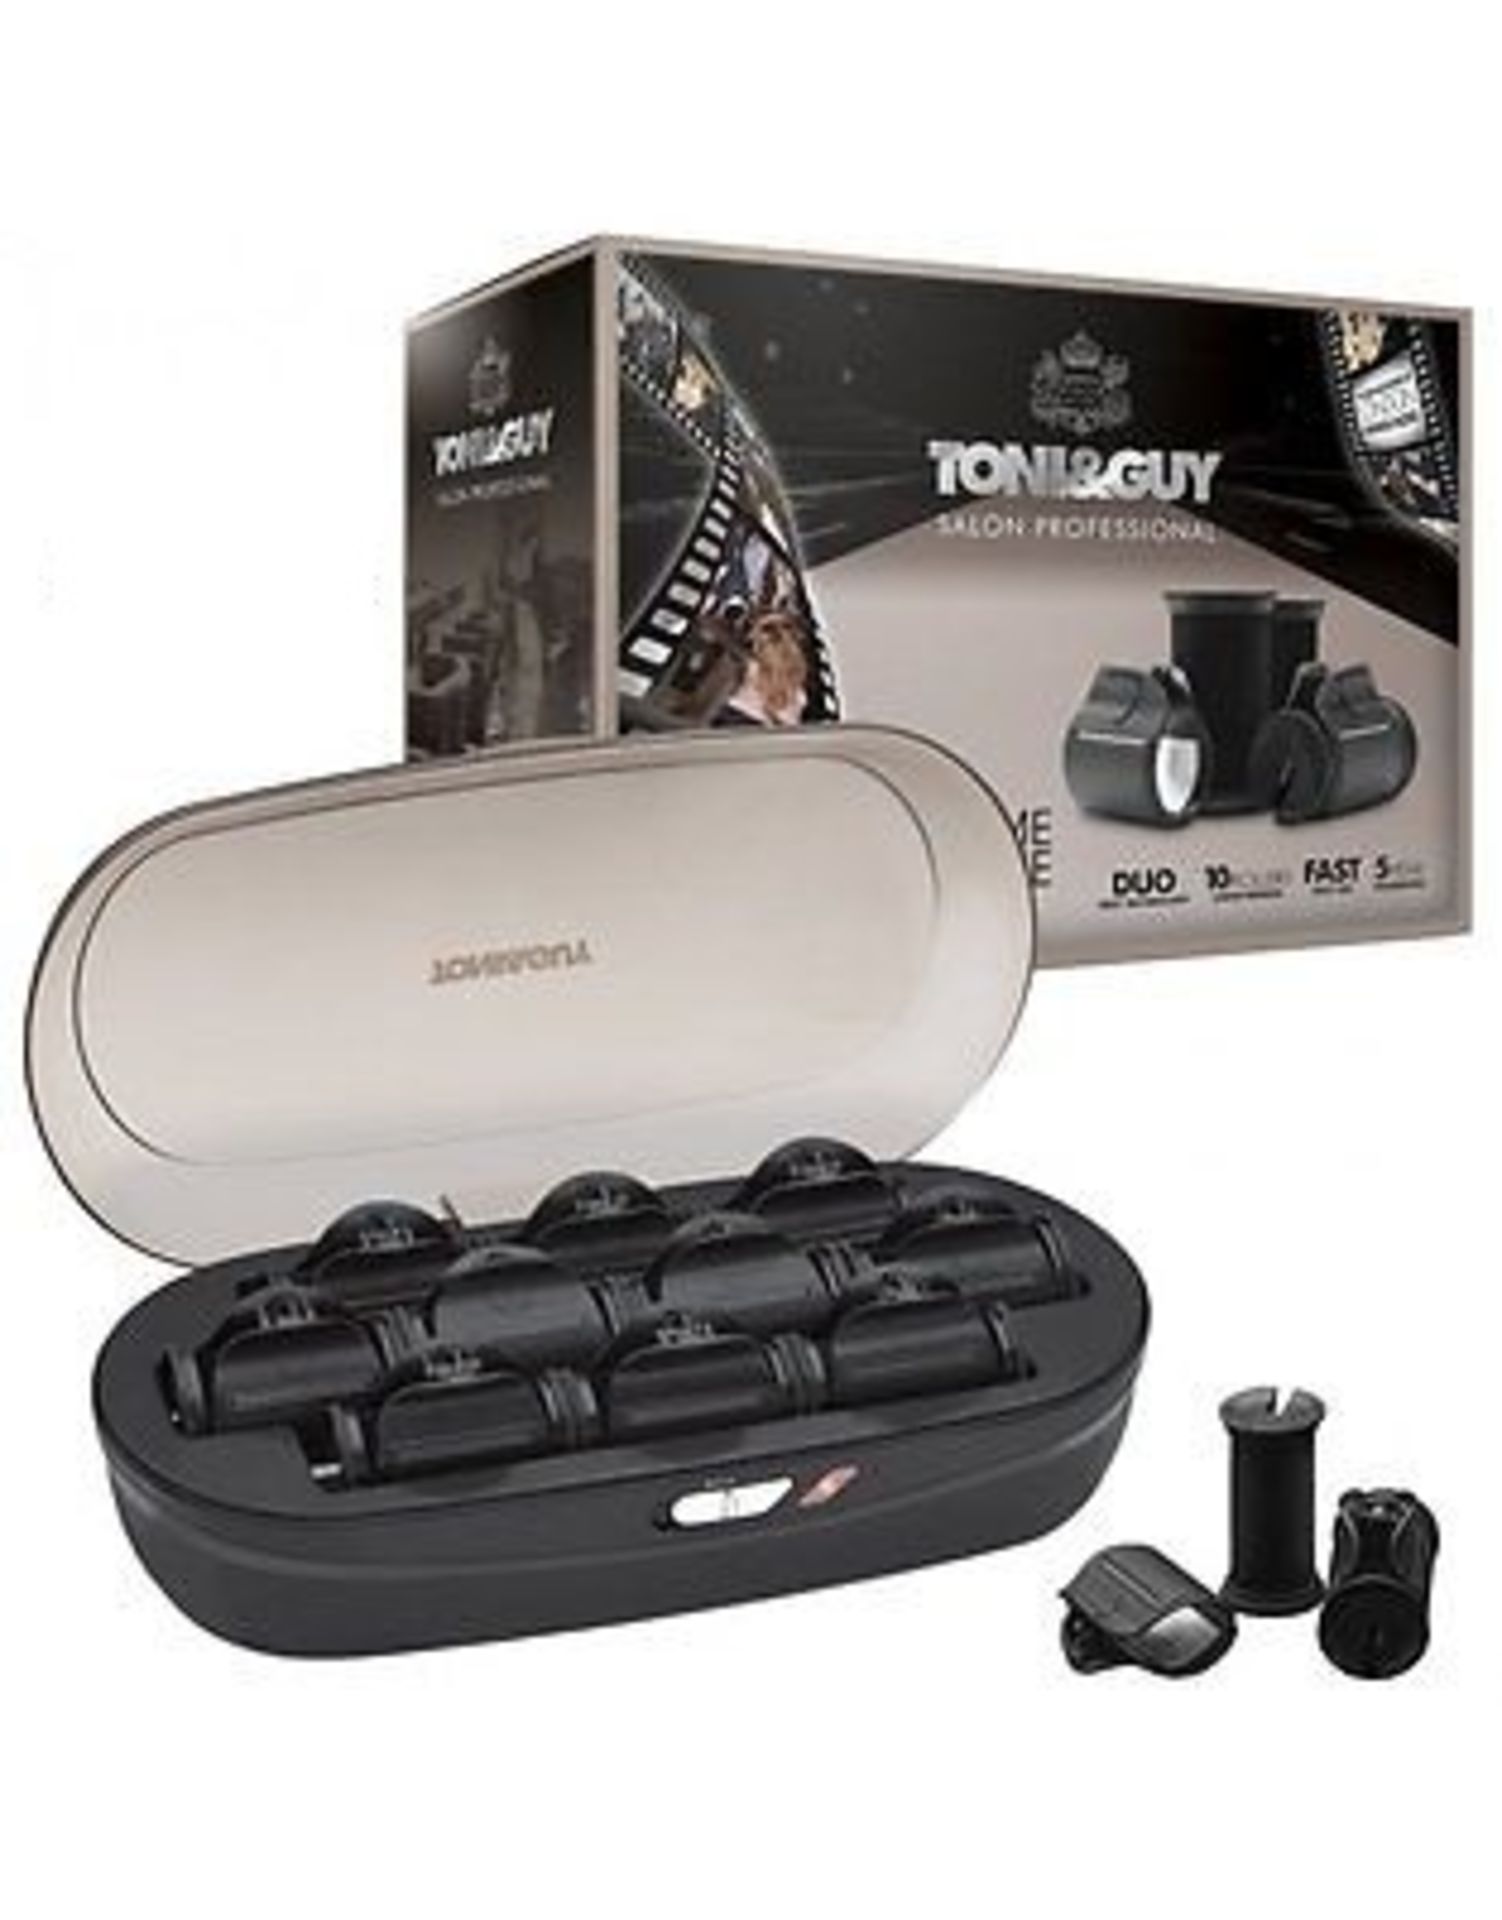 V Brand New Toni & Guy Salon Professional Extreme Volume Heated Rollers With Unique Duo Heat